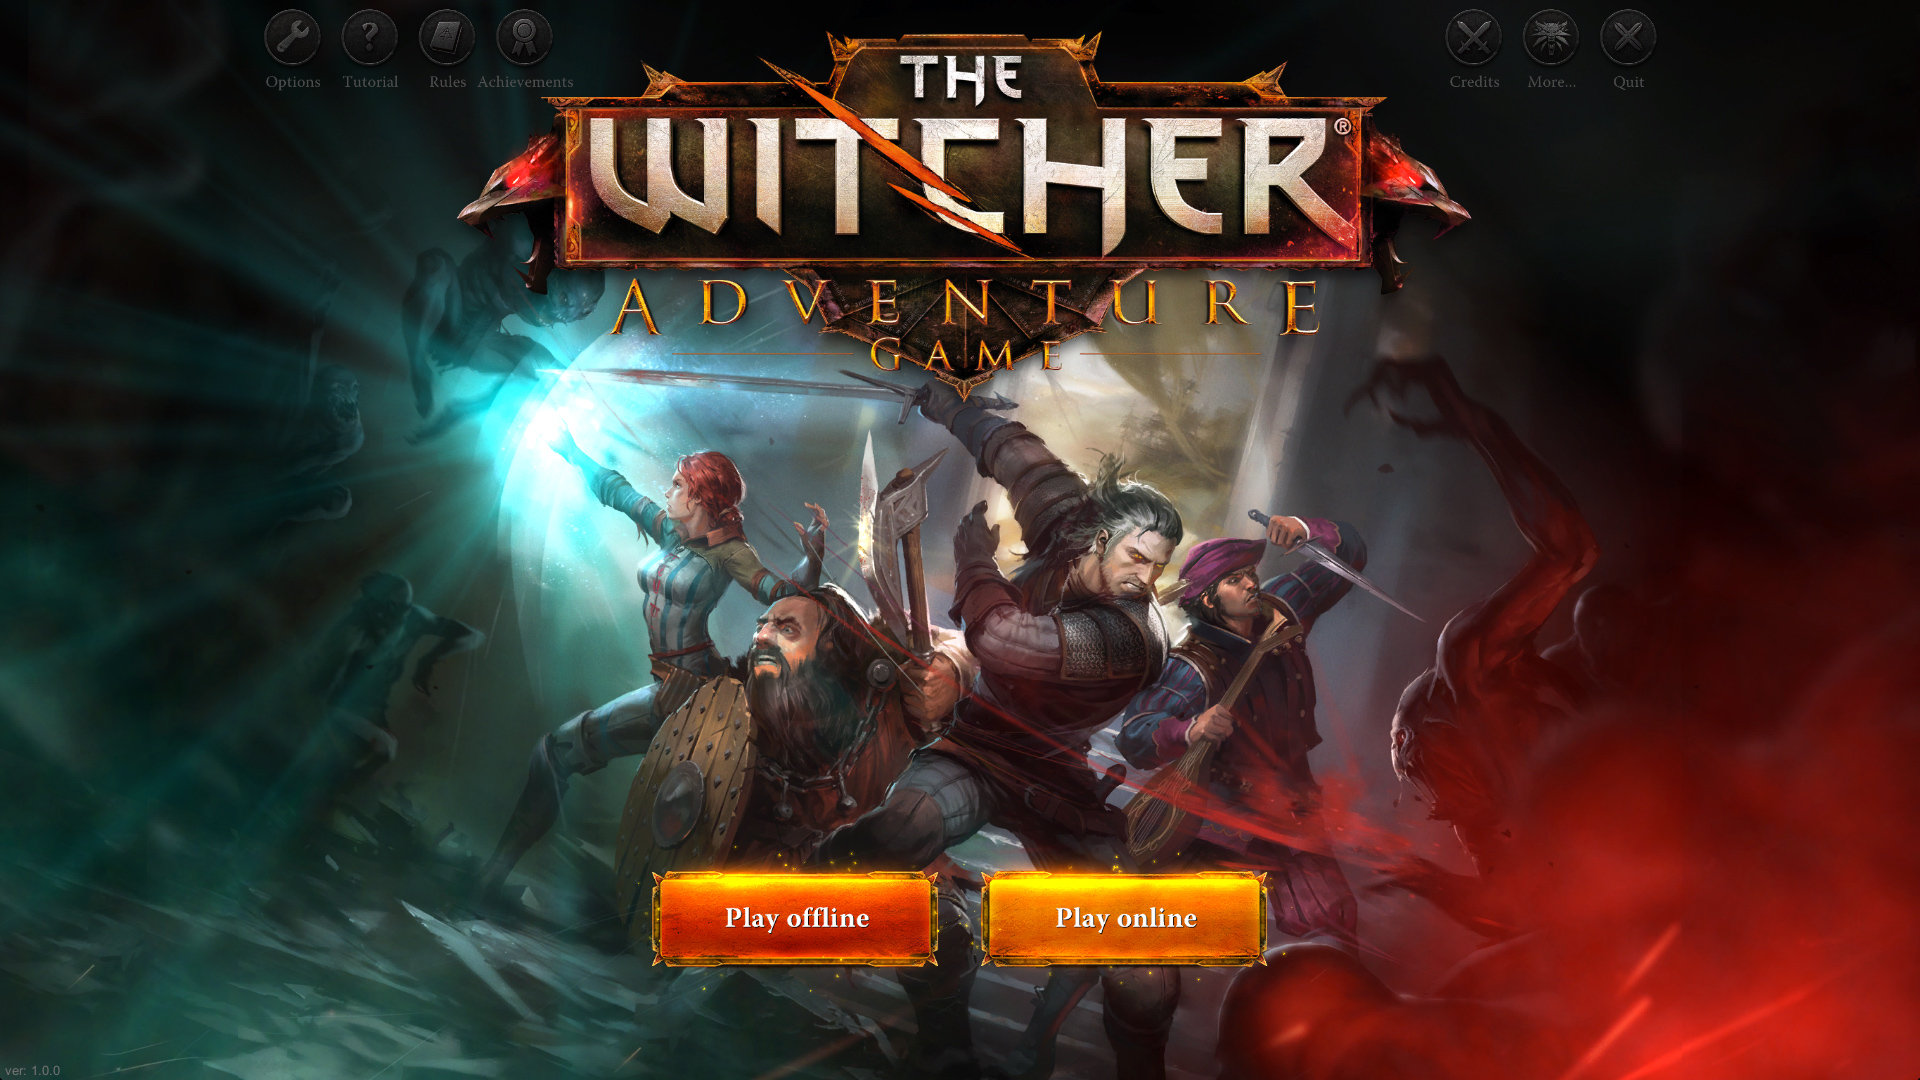 The Witcher Adventure Game Images 